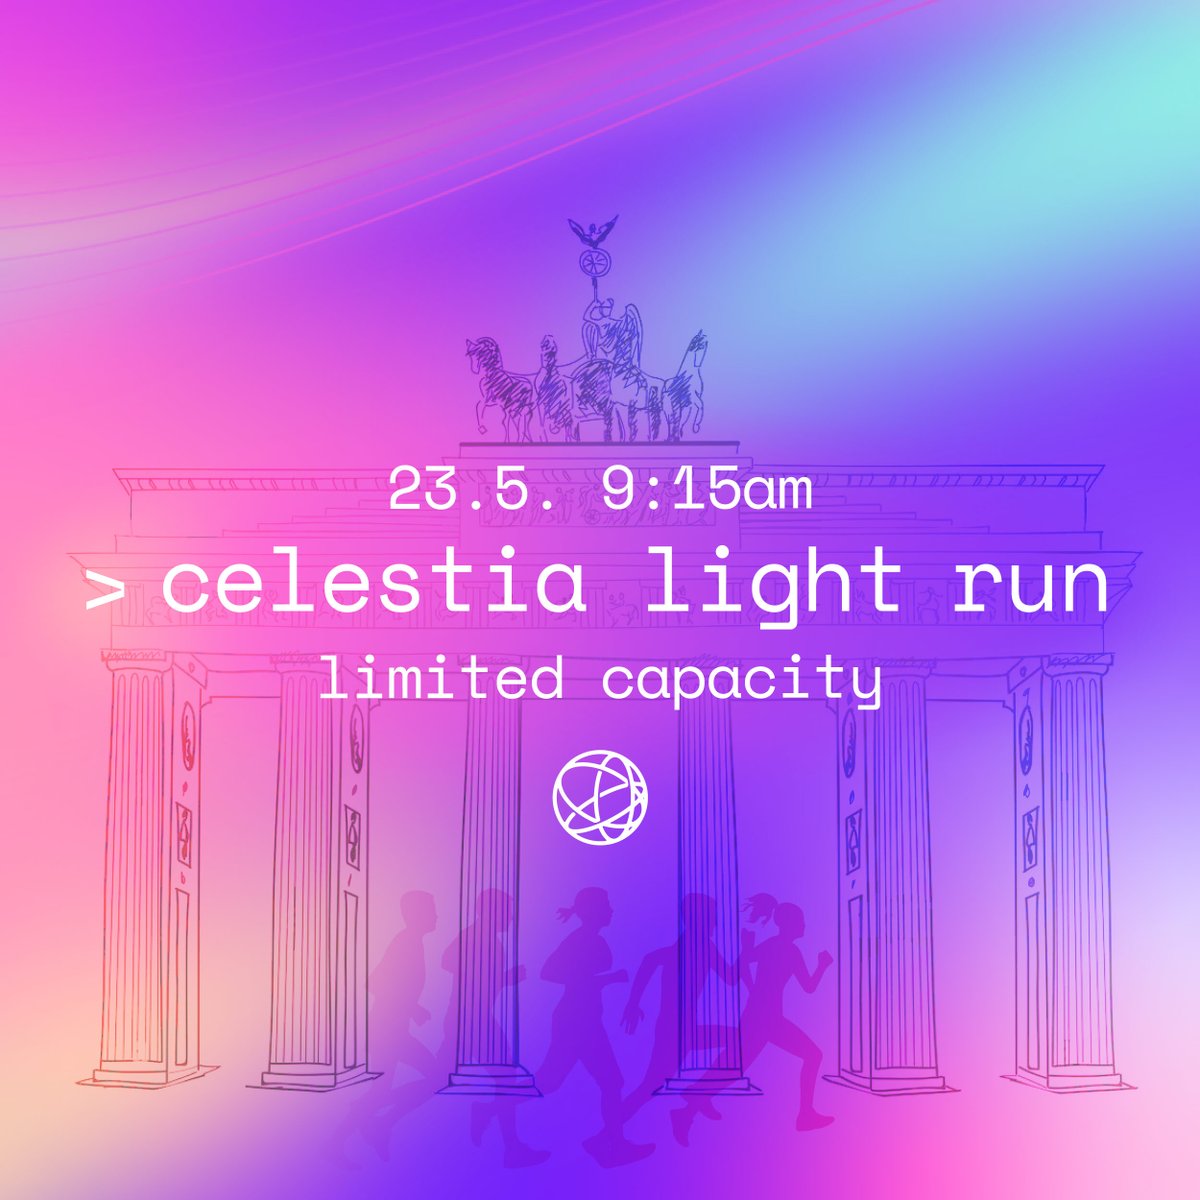 We build, we ship and we run! 🏃🏻‍♀️ Running season has started baby, come join @CelestiaOrg team for a morning jog and a little breakfast. Sweat with us before your hectic conference day starts! Our marathon runners will be leading the way... @renelubov, @ninabarbakadze & team💜